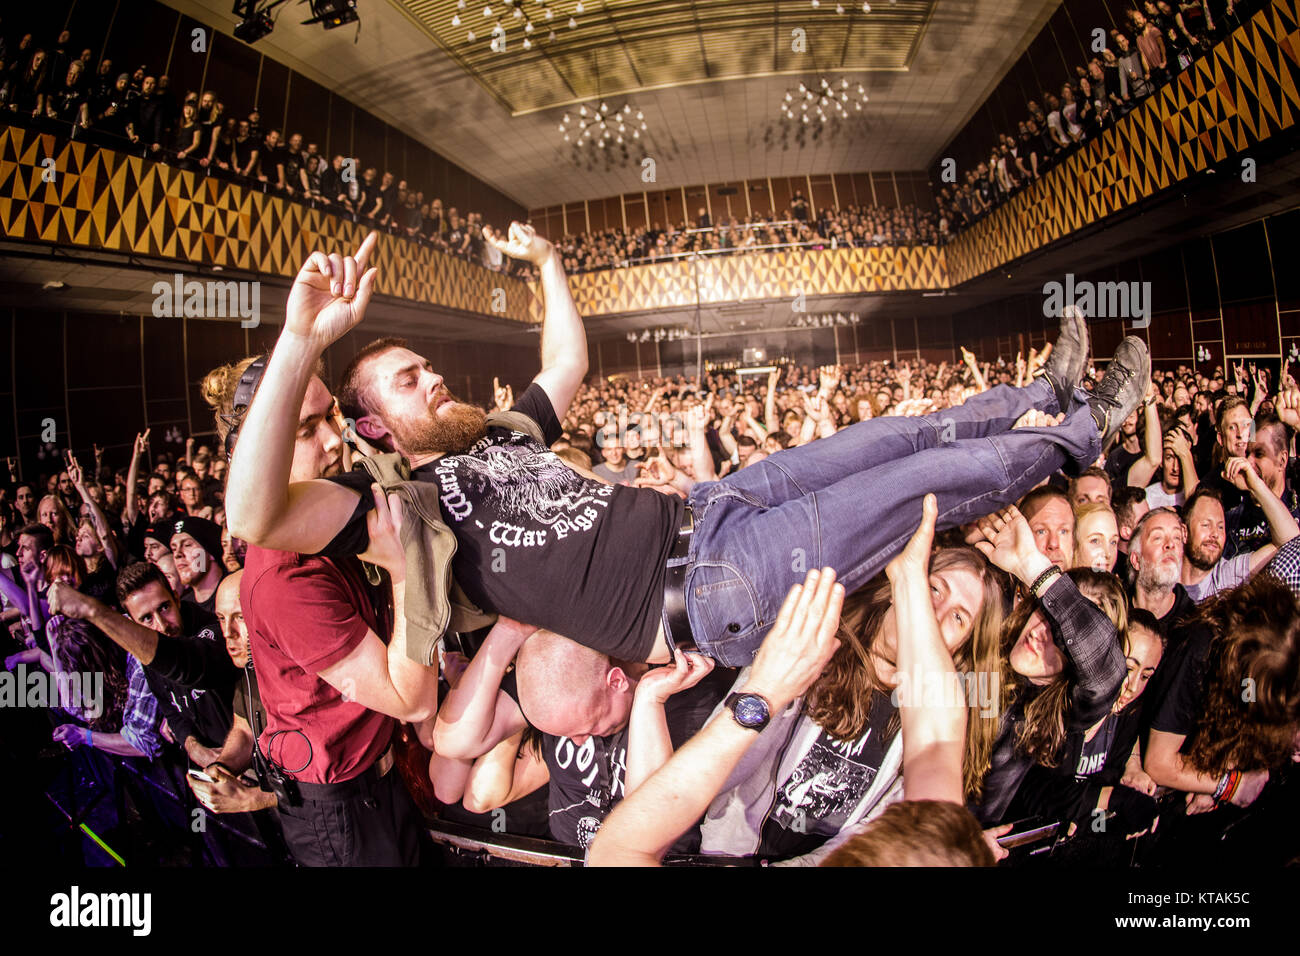 Heavy metal fans attend a concert with the French death metal band Gojira performs at VEGA in Copenhagen. Here guitarist and vocalist Here a concert goer is crowd surfing. Denmark, 09/03 2017. Stock Photo